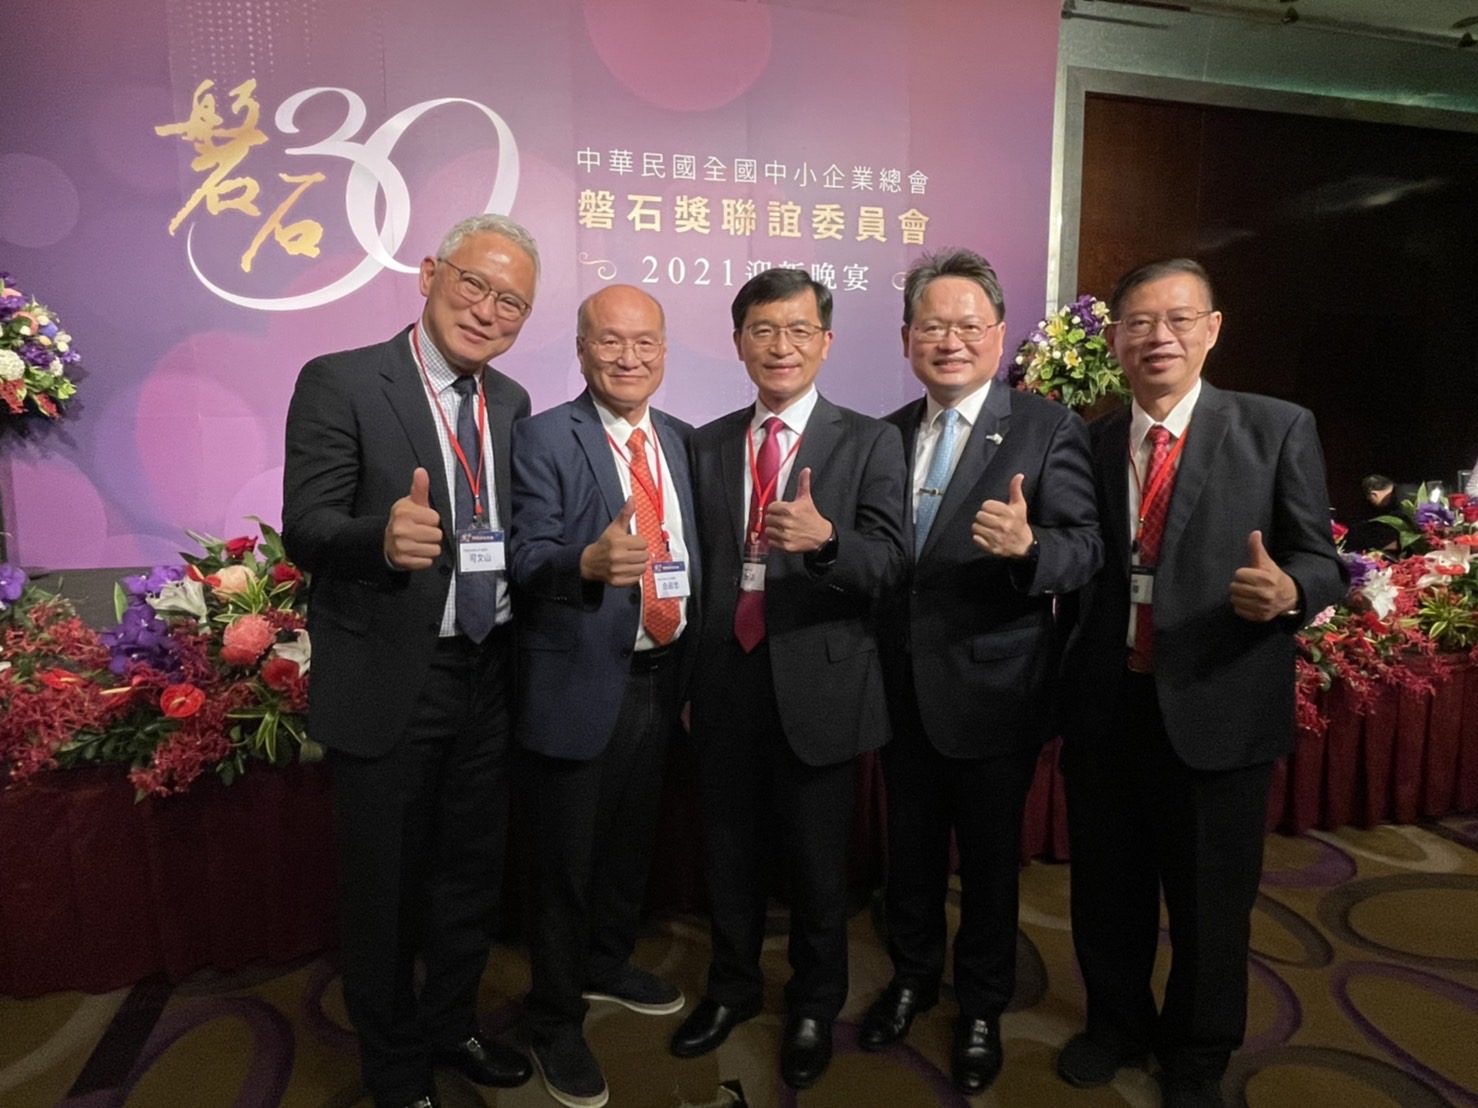 President Gary Chen of the SMEs Award Fellowship Committee came to congratulate the new companies that won the 30th of  SMEs Award and the 23rd Overseas of SMEs Award